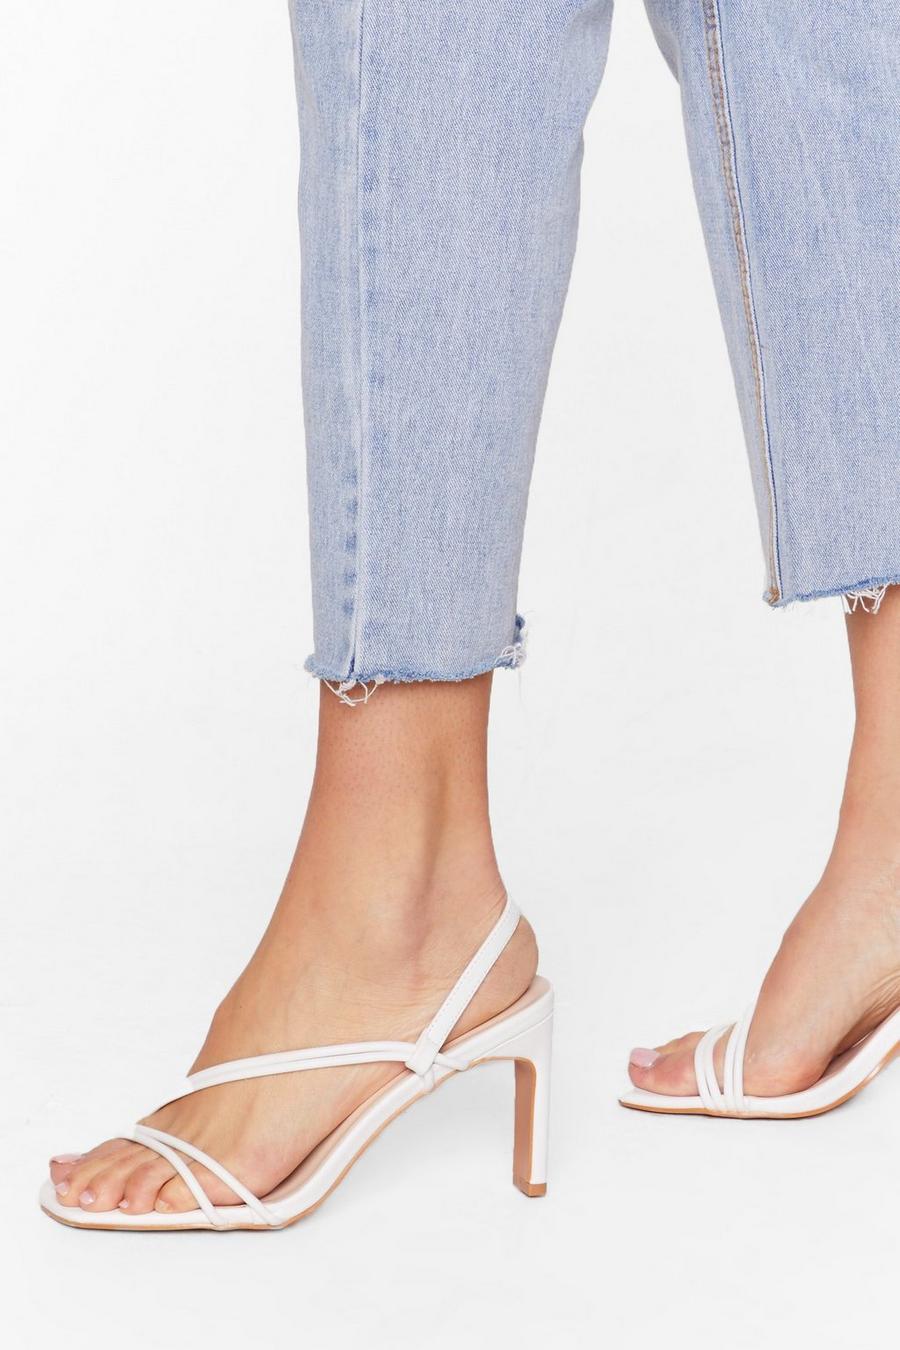 We're Strappy Together Faux Leather Heels